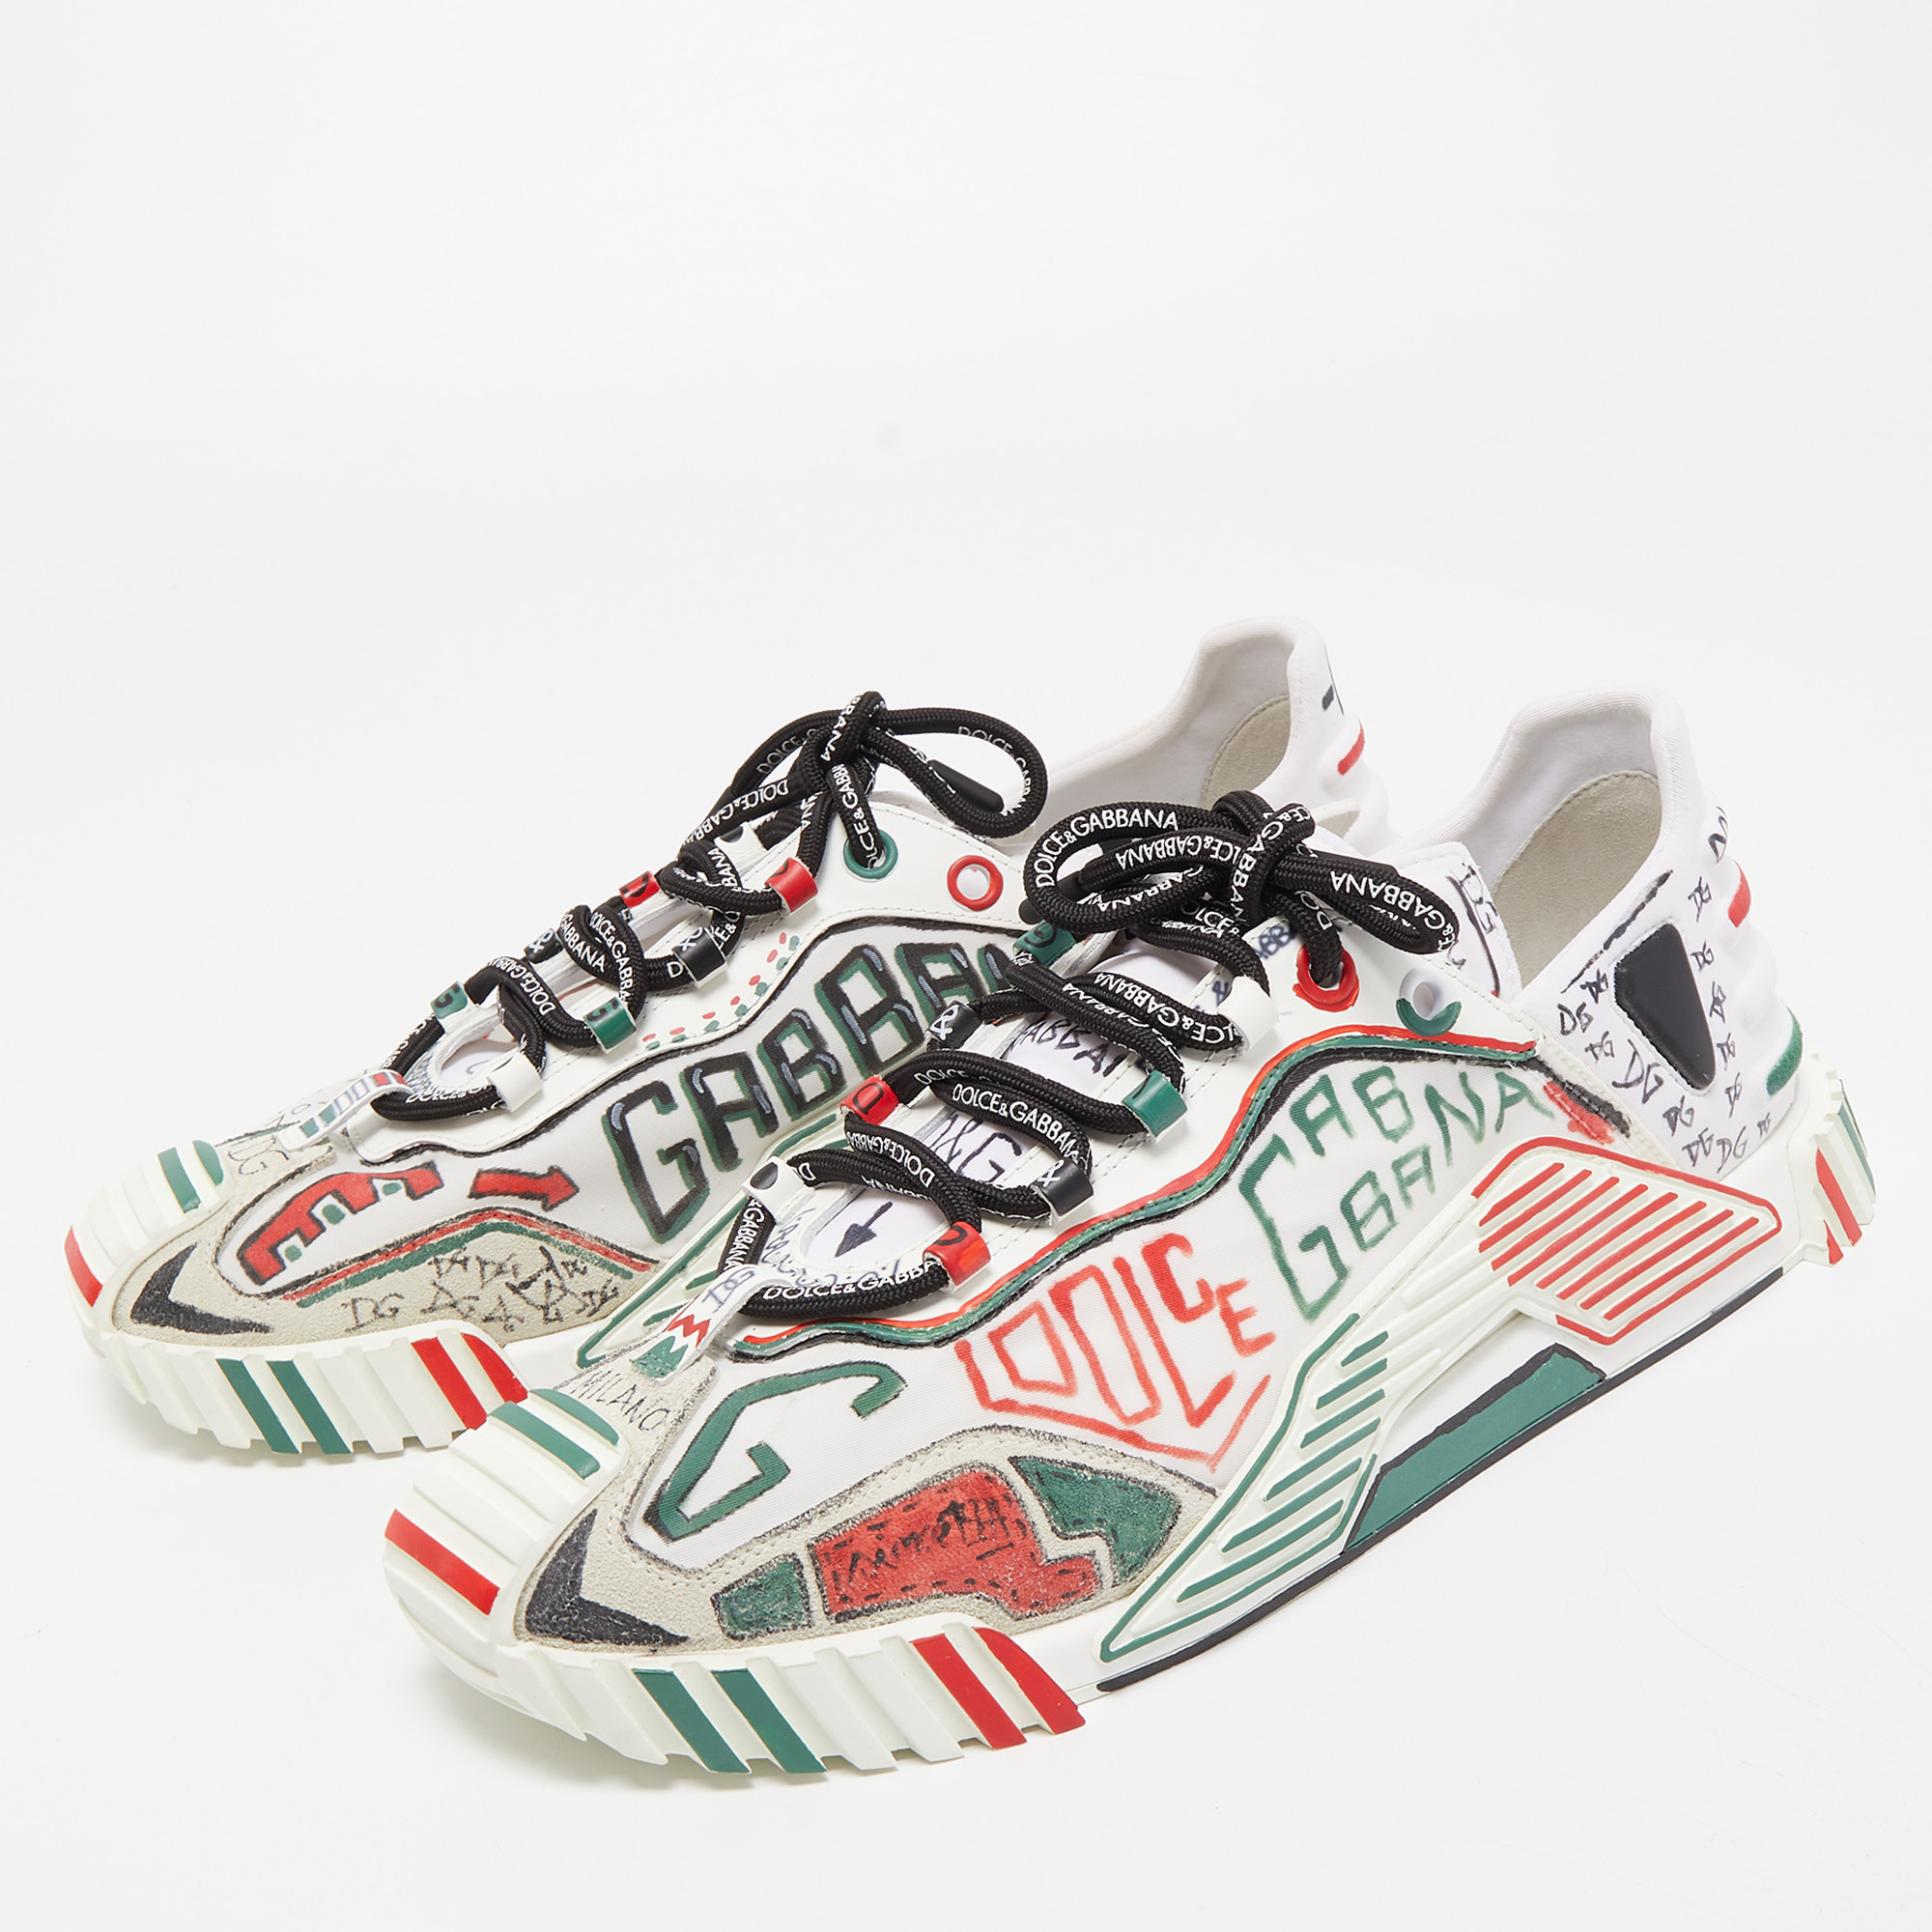 

Dolce & Gabbana Multicolor Canvas and Fabric Graffti Print NS1 Low Top Sneakers Size